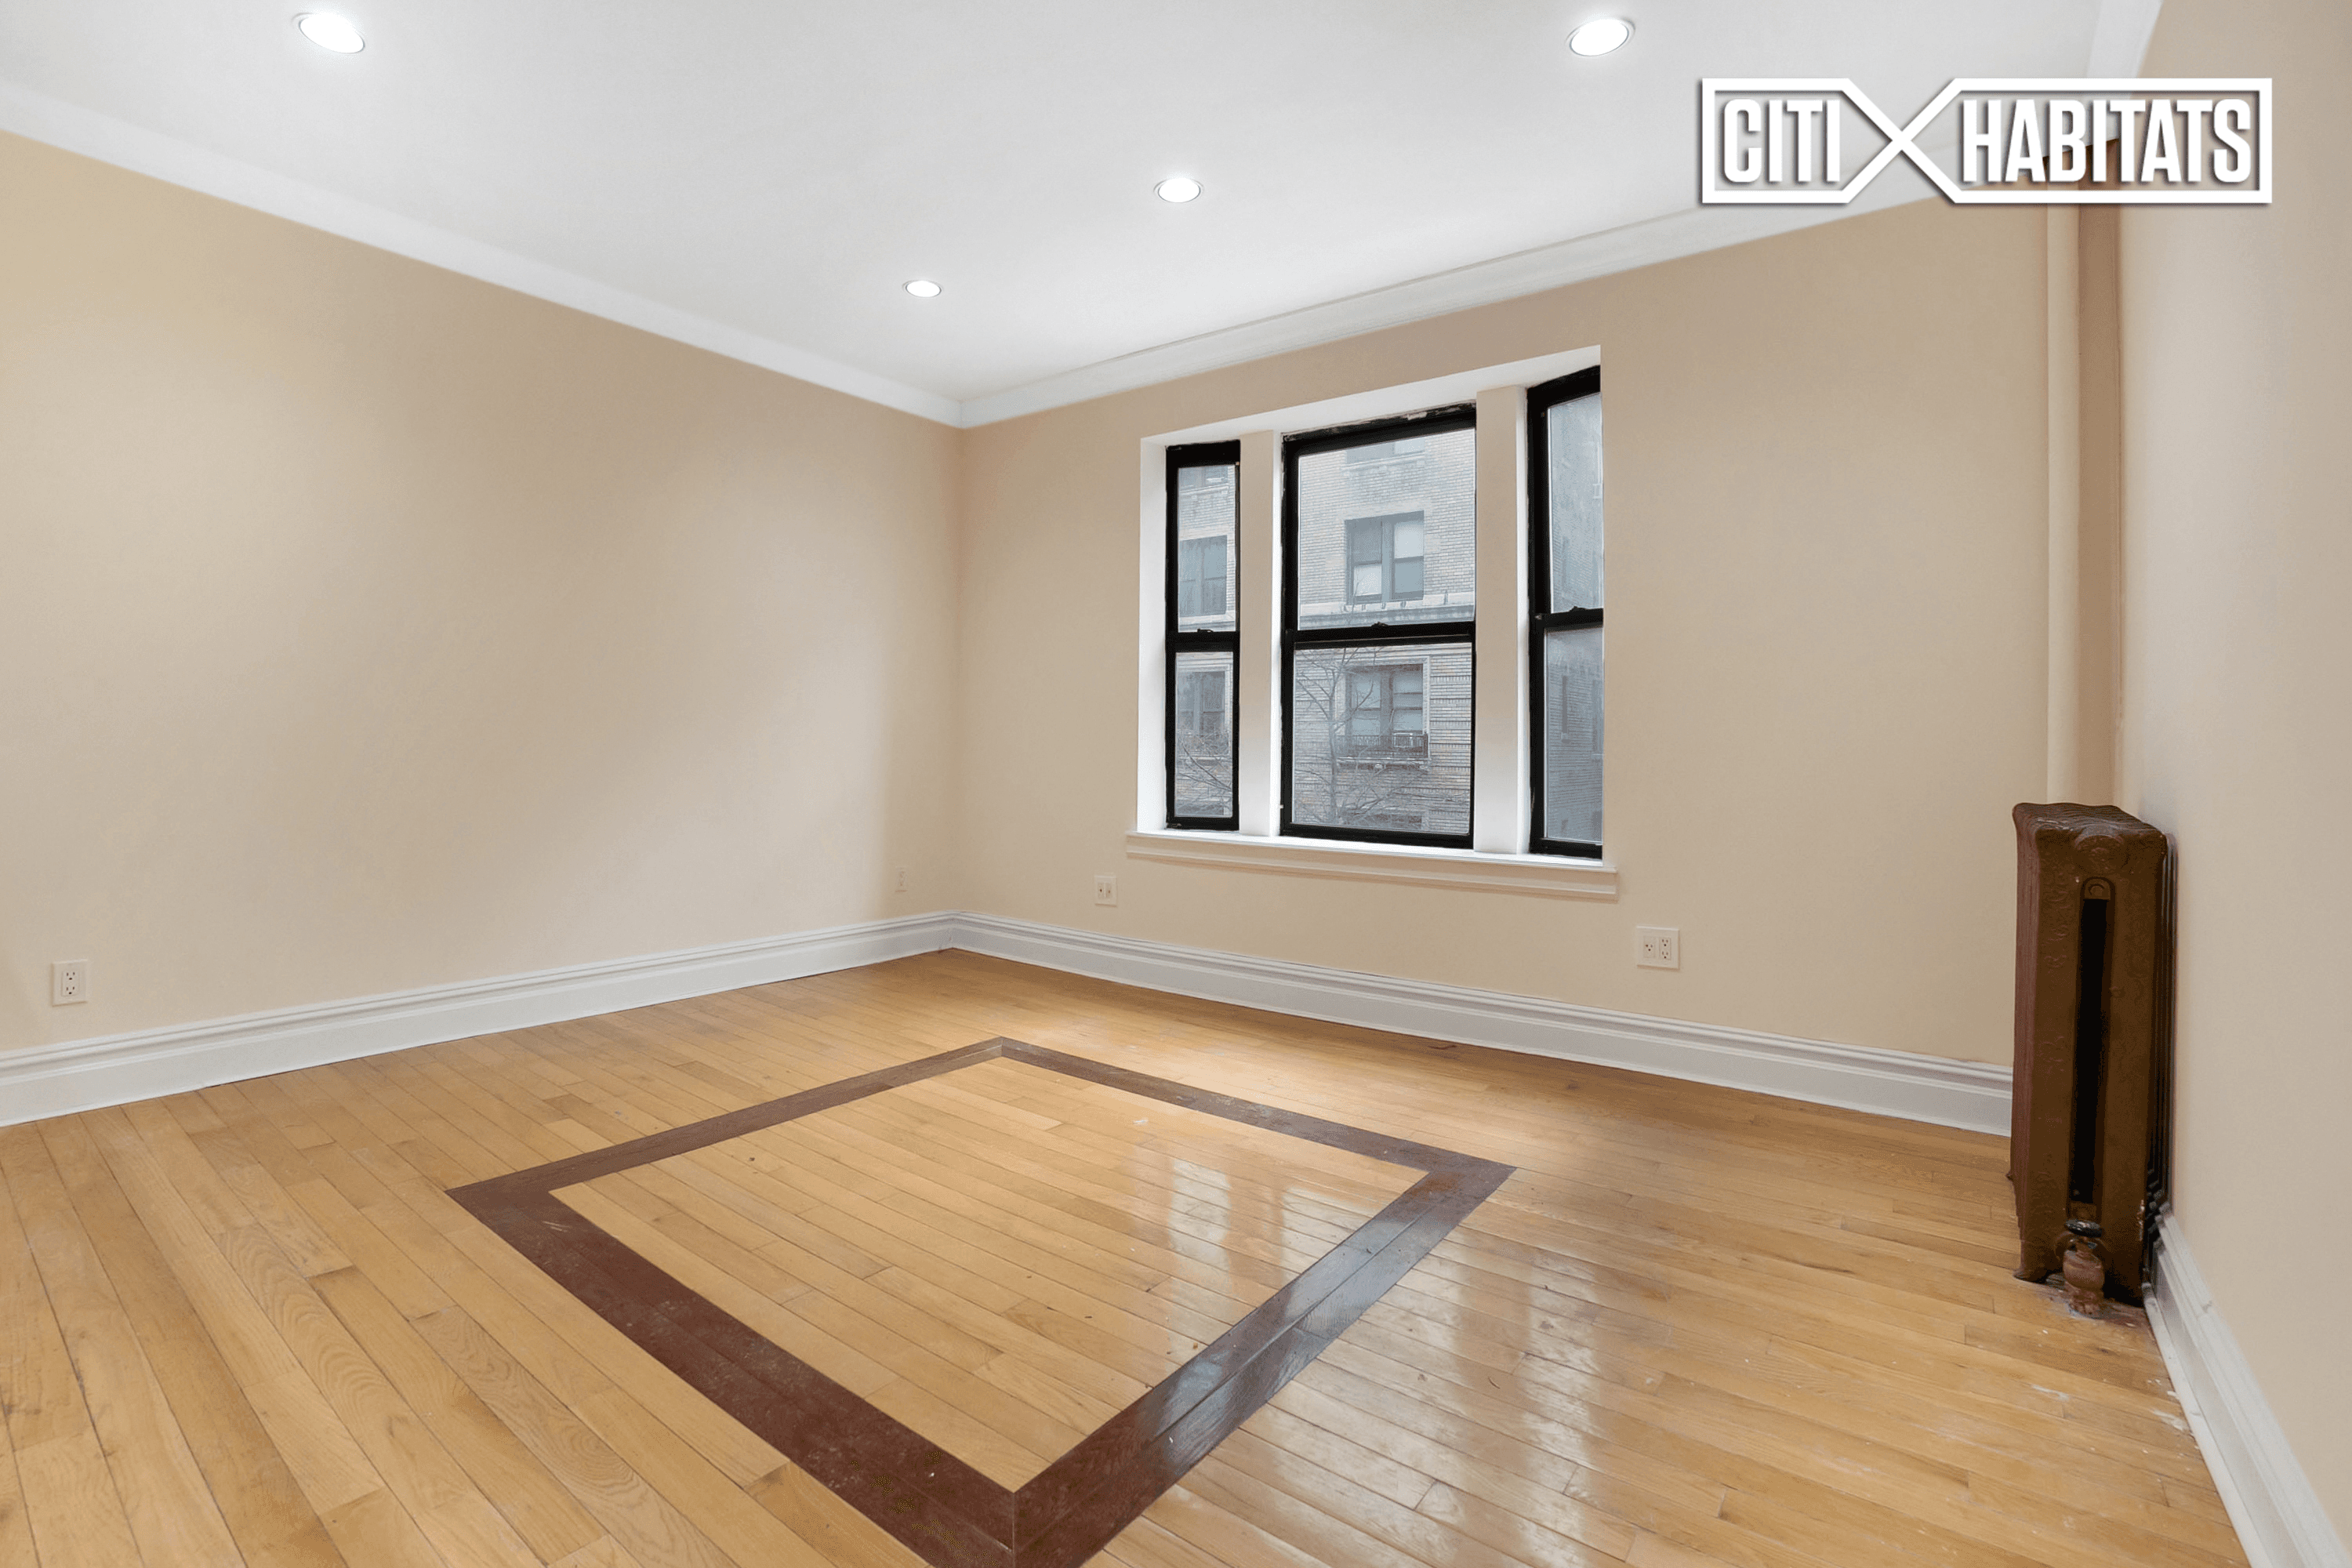 NO BROKER FEE ! 1400 Square Feet throughout this 4 Bedroom 2 Bath a Washer Dryer hookup in a Prewar elevator Building Situated just off Riverside Drive !